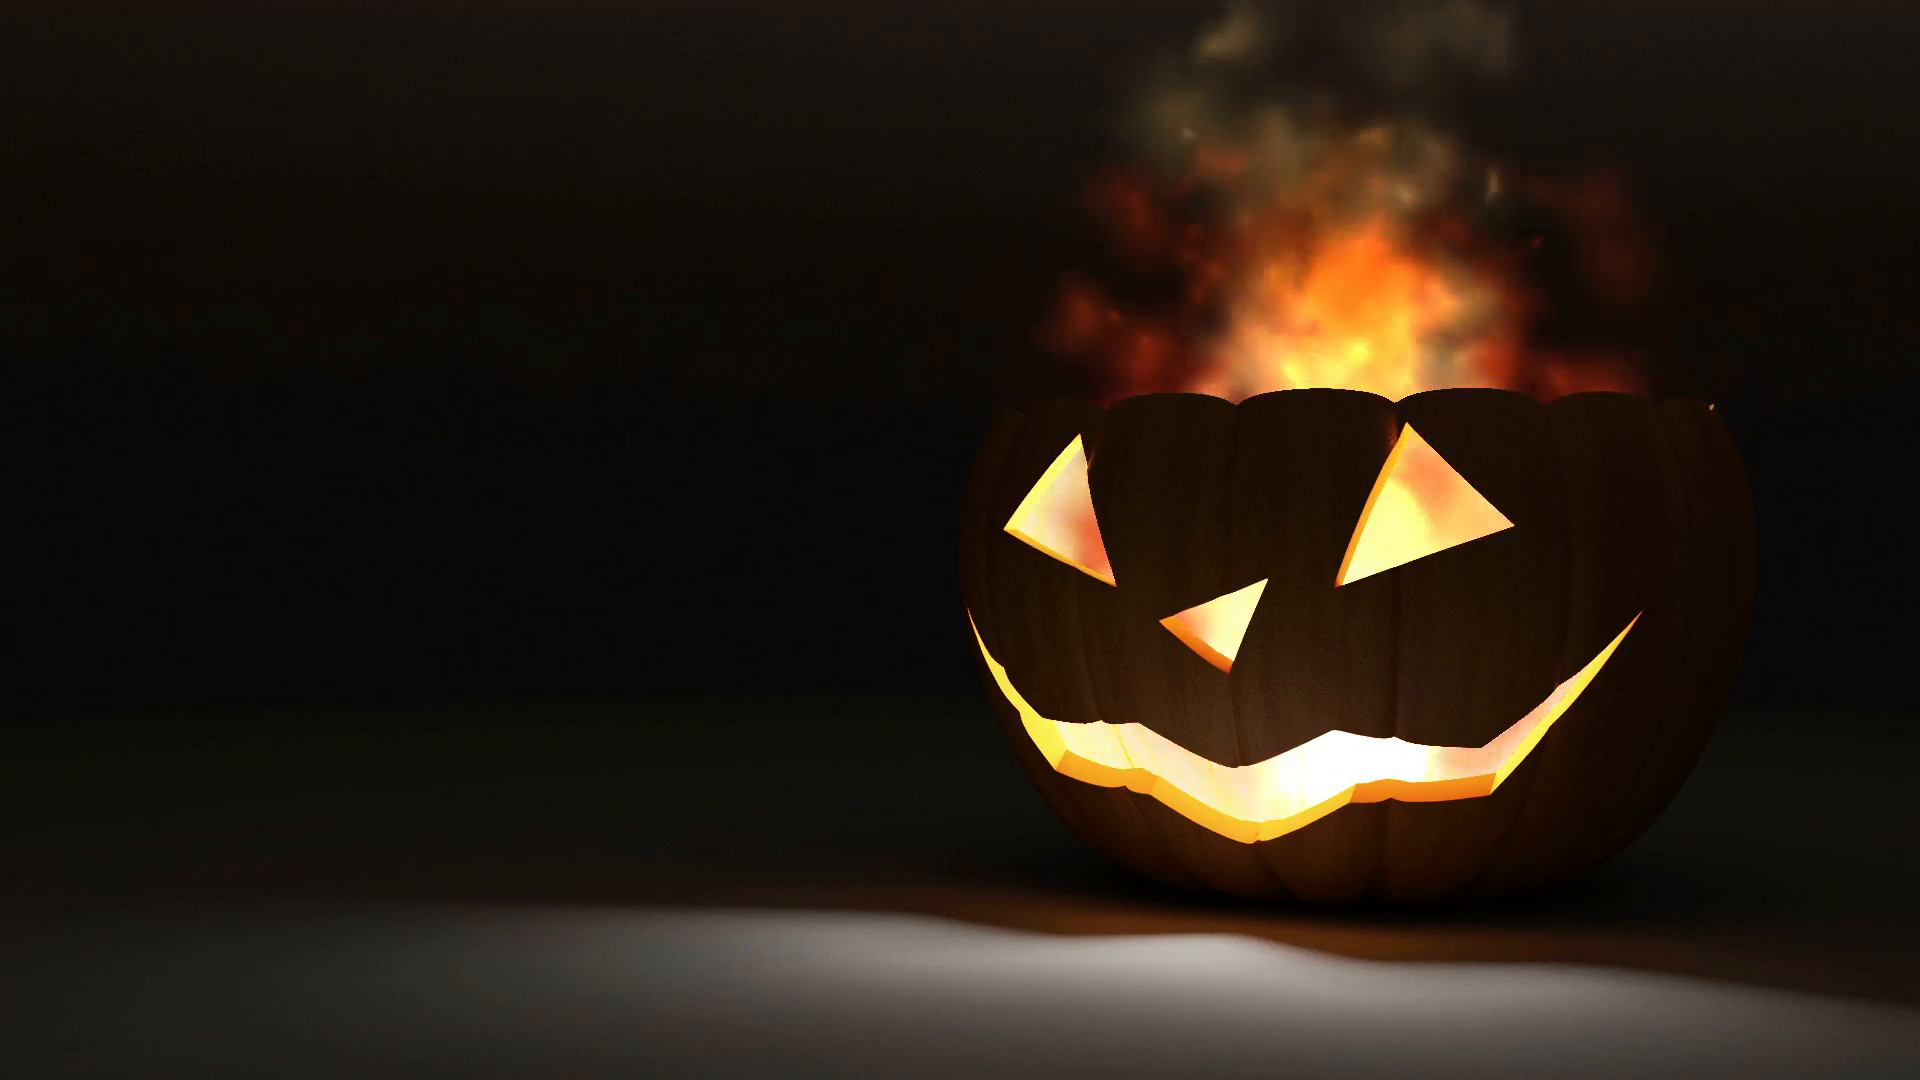 1920x1080 Seamless Looping Animation of Halloween Jack O Lantern Pumpkin with Fire  Flame on black background. HQ Video Clip Motion Background - Storyblocks  Video